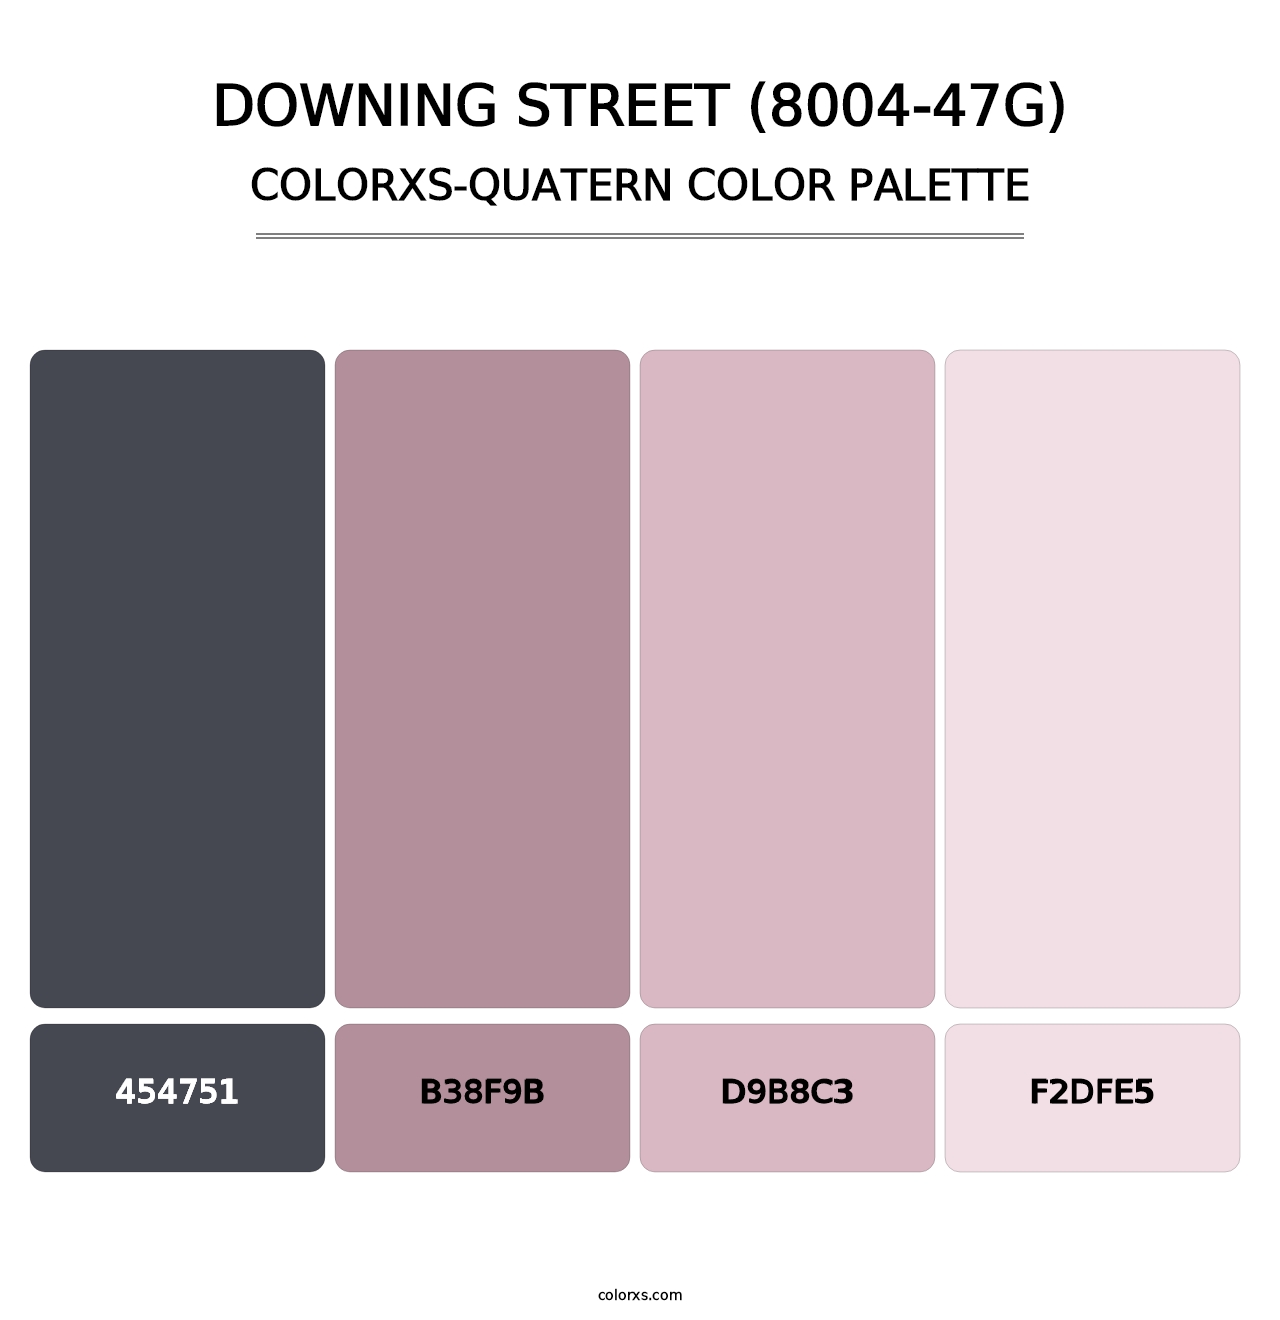 Downing Street (8004-47G) - Colorxs Quatern Palette